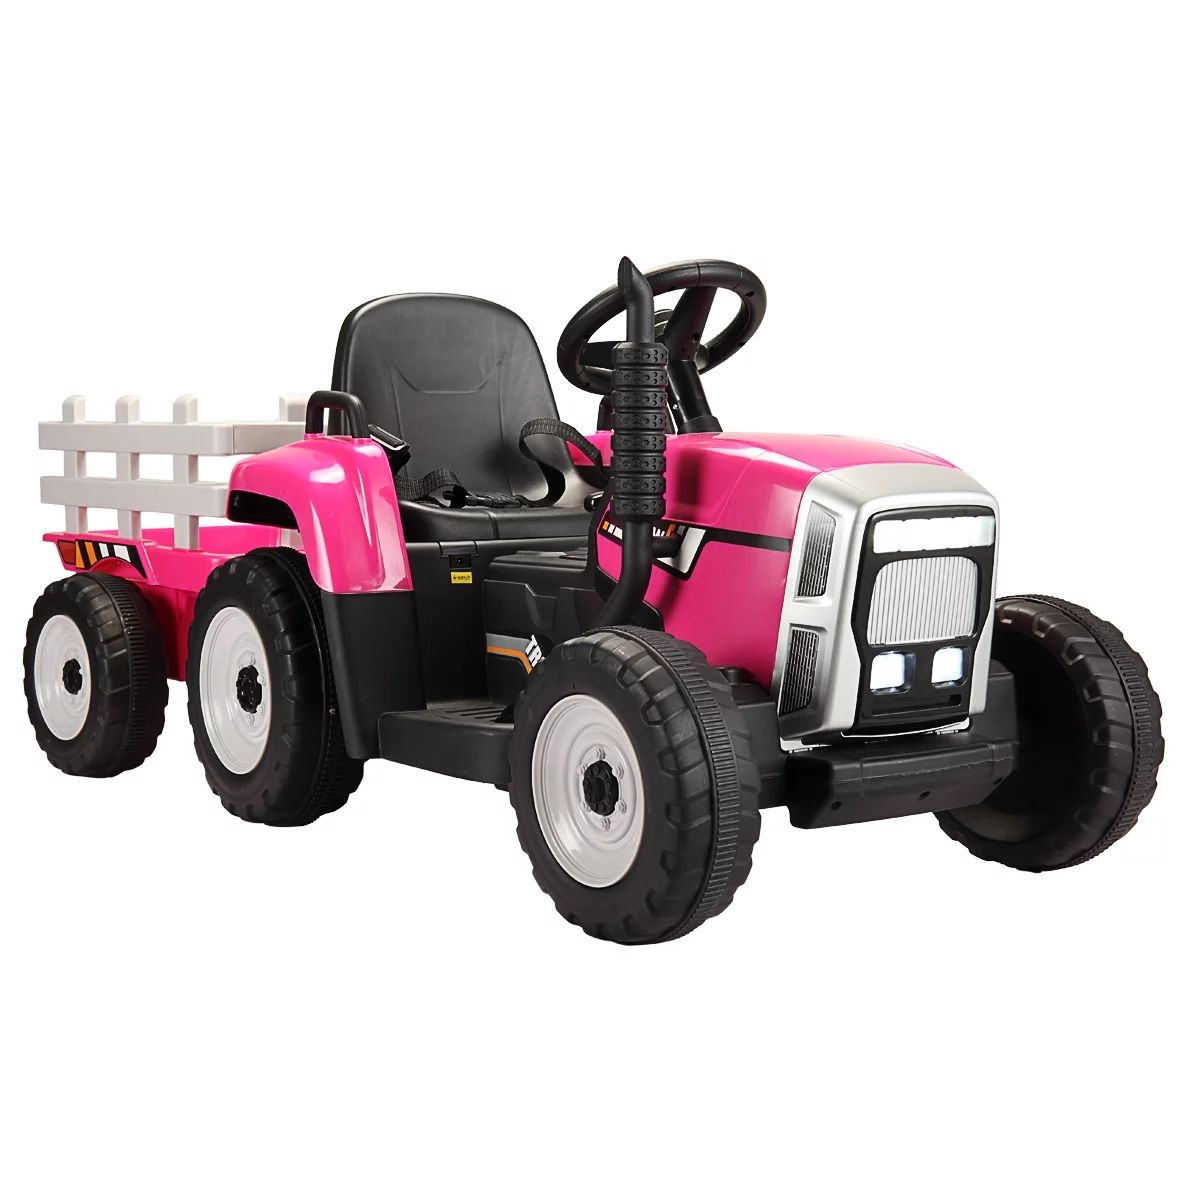 Veryke 12V Kids Ride On Tractor with Detachable Trailer, Battery-Powered Toy Car for Girls - Pink | Walmart (US)